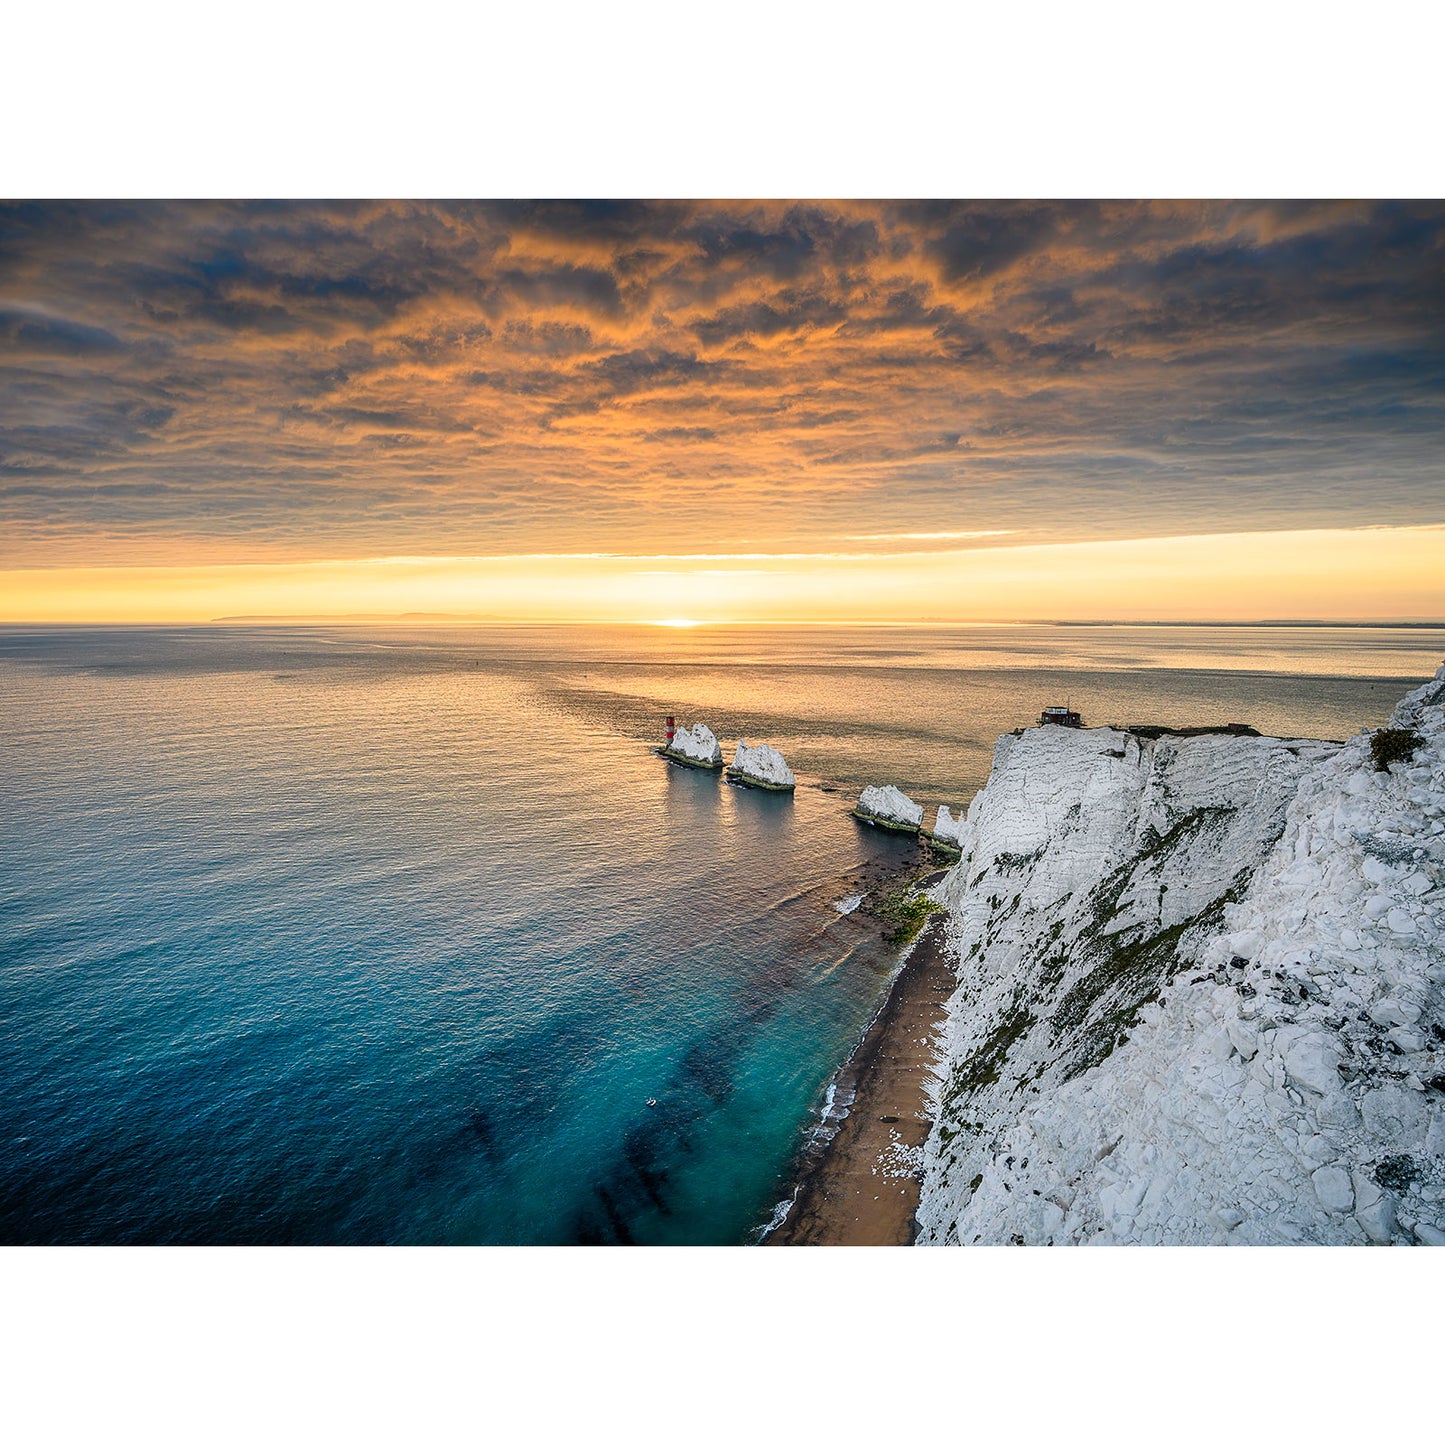 Sunset over a calm sea with white cliffs on the right and a ship near the coast under a cloudy sky captured by Available Light Photography. Image number: 2764 featuring The Needles.